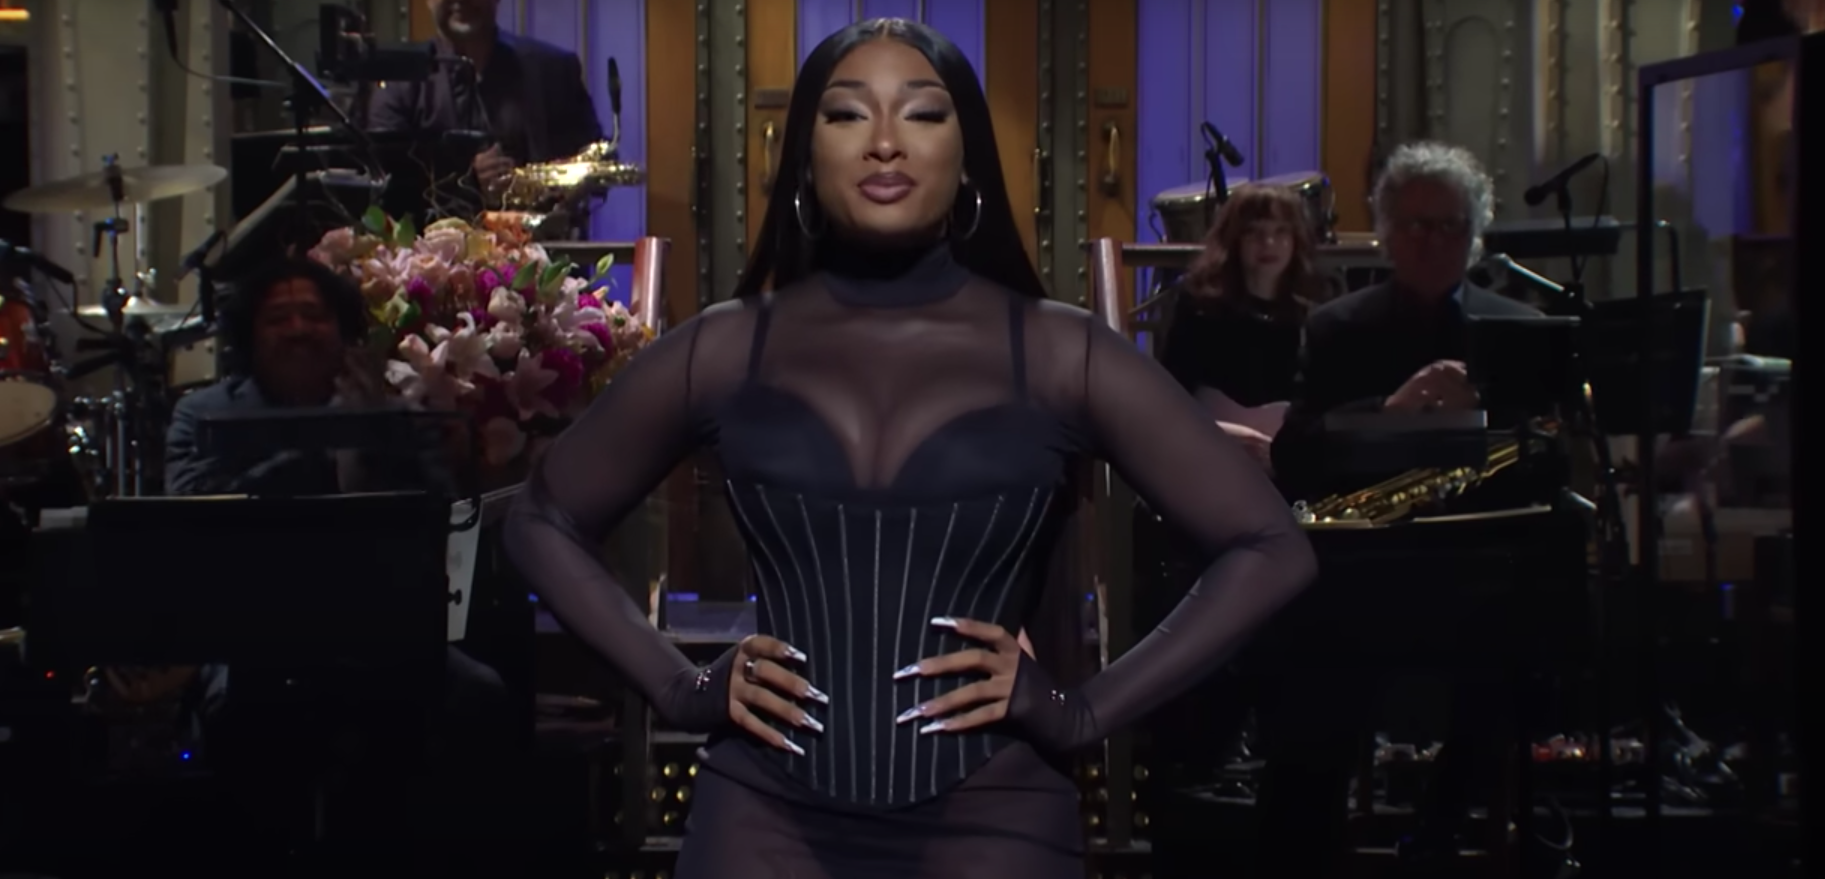 Megan Thee Stallion Is the Centerpiece of New 'Her' Video